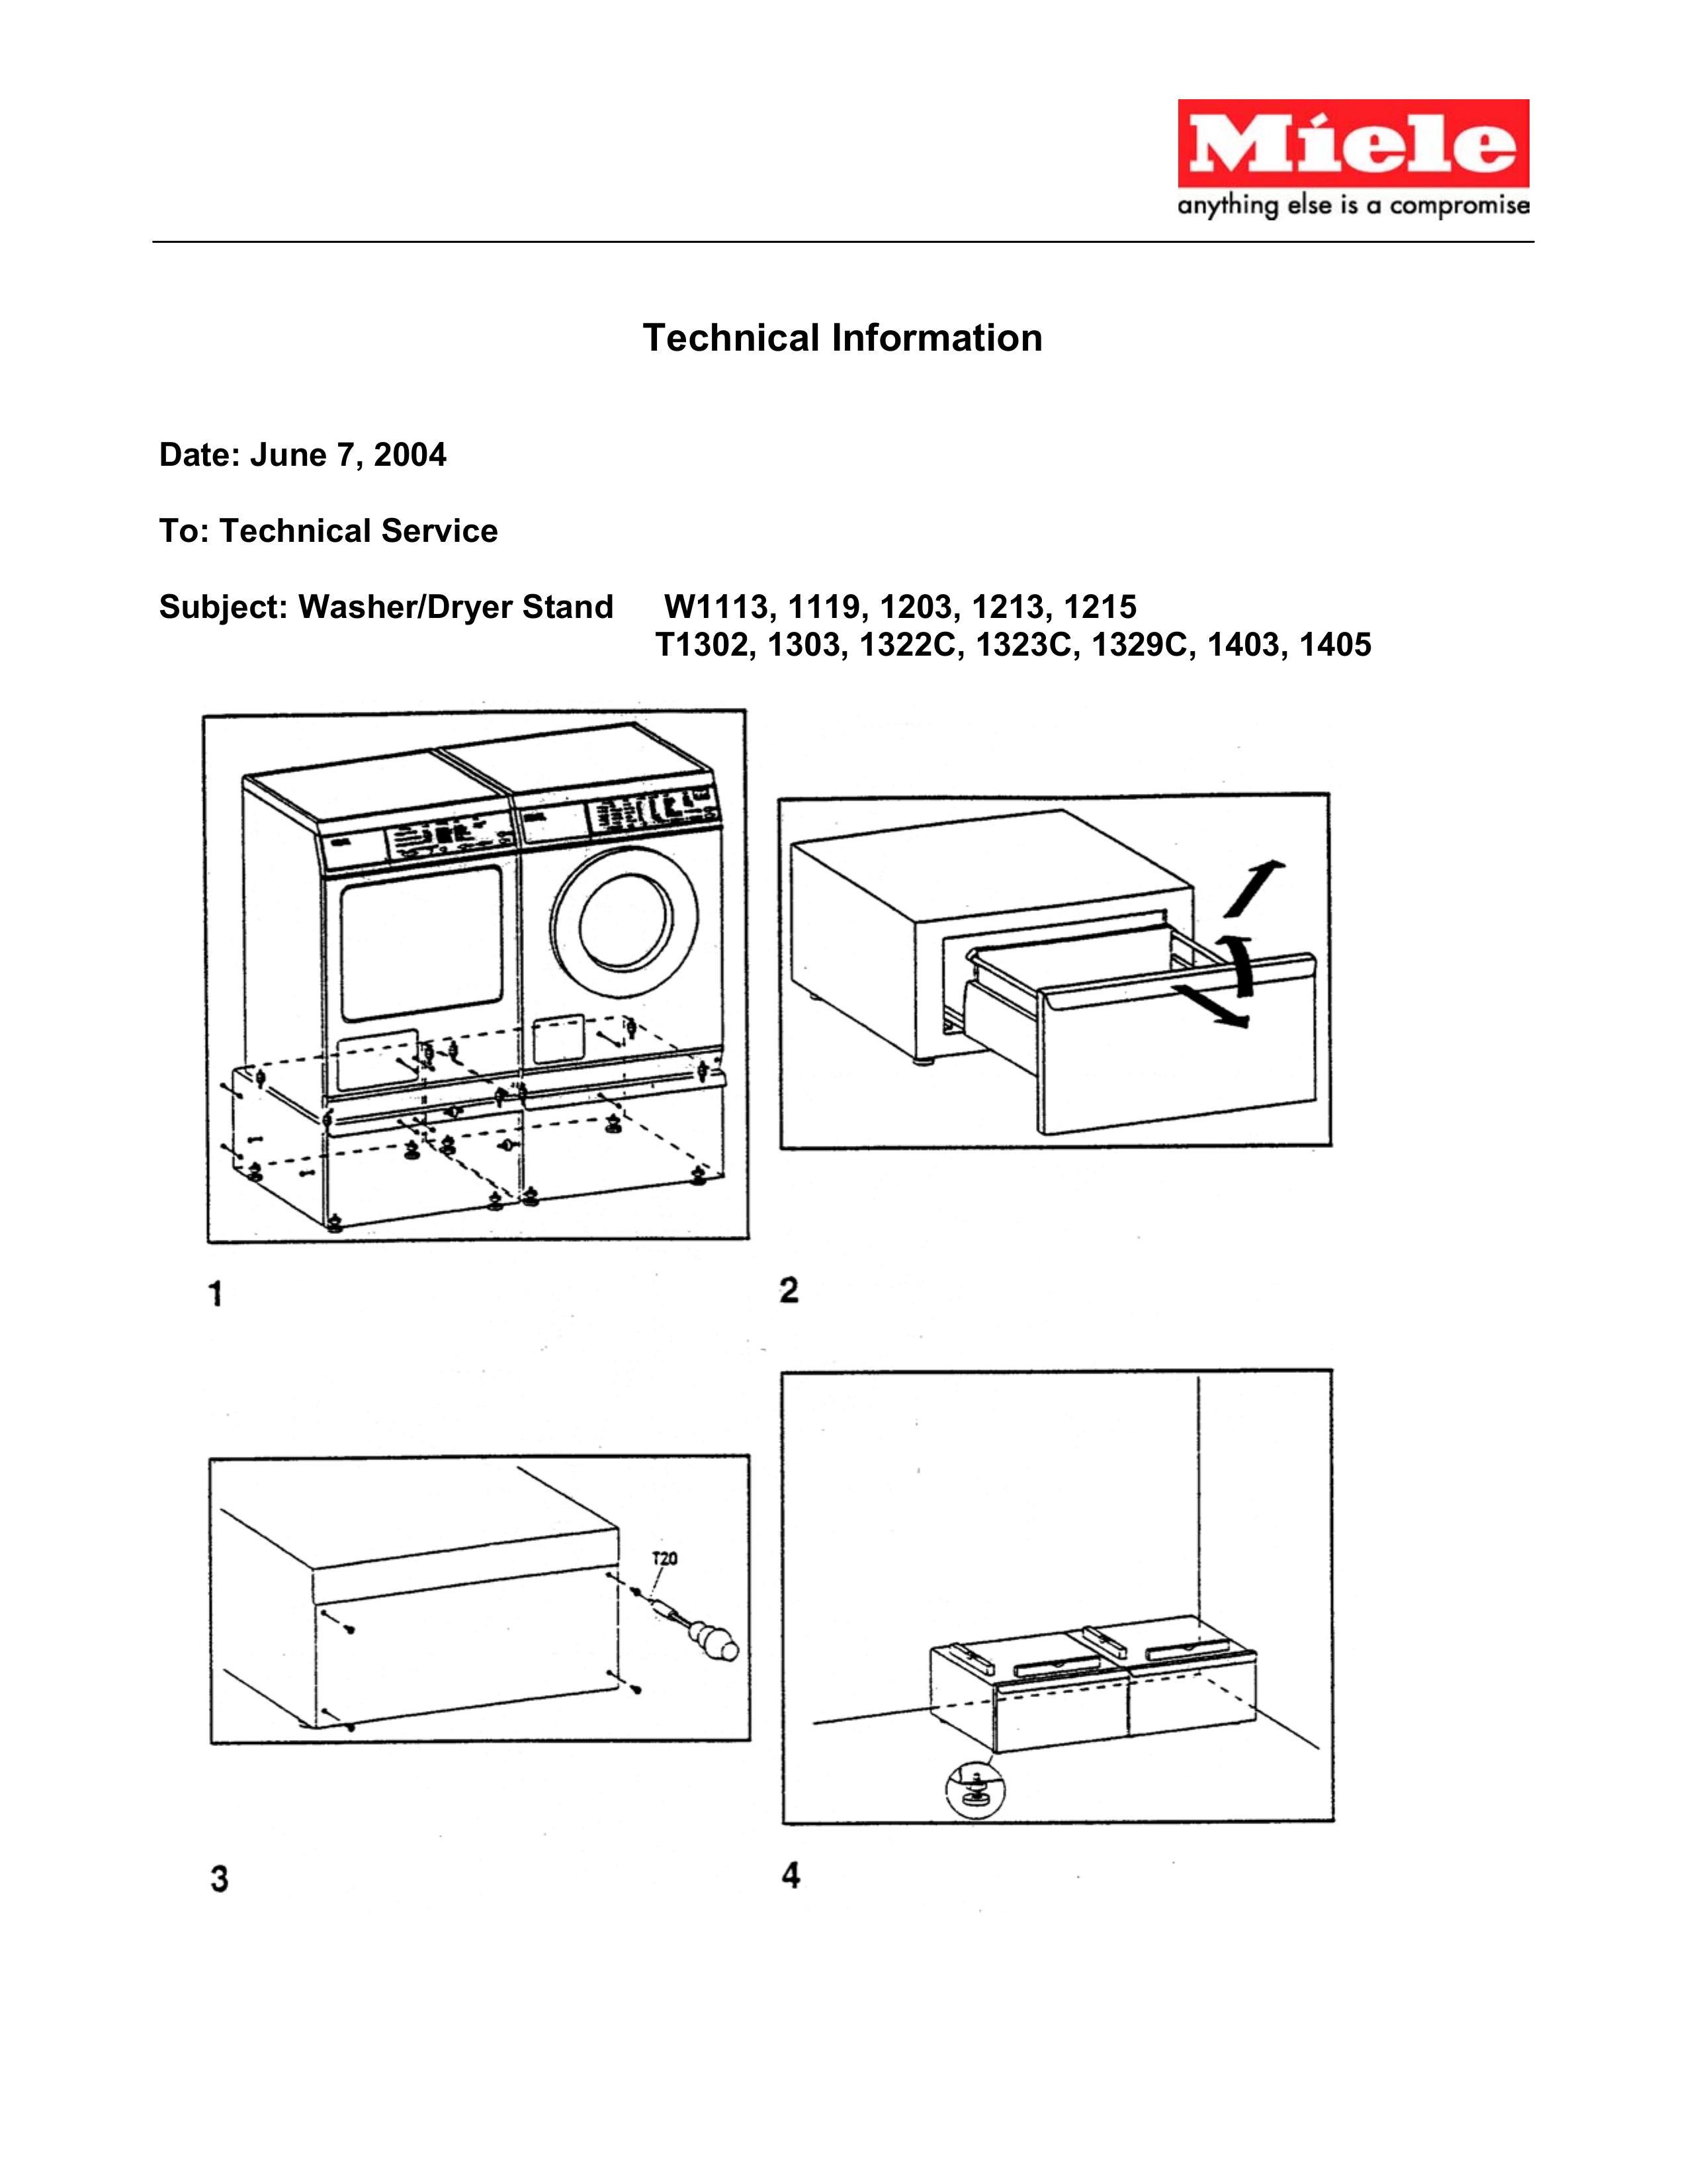 Miele W1119 Washer Accessories User Manual